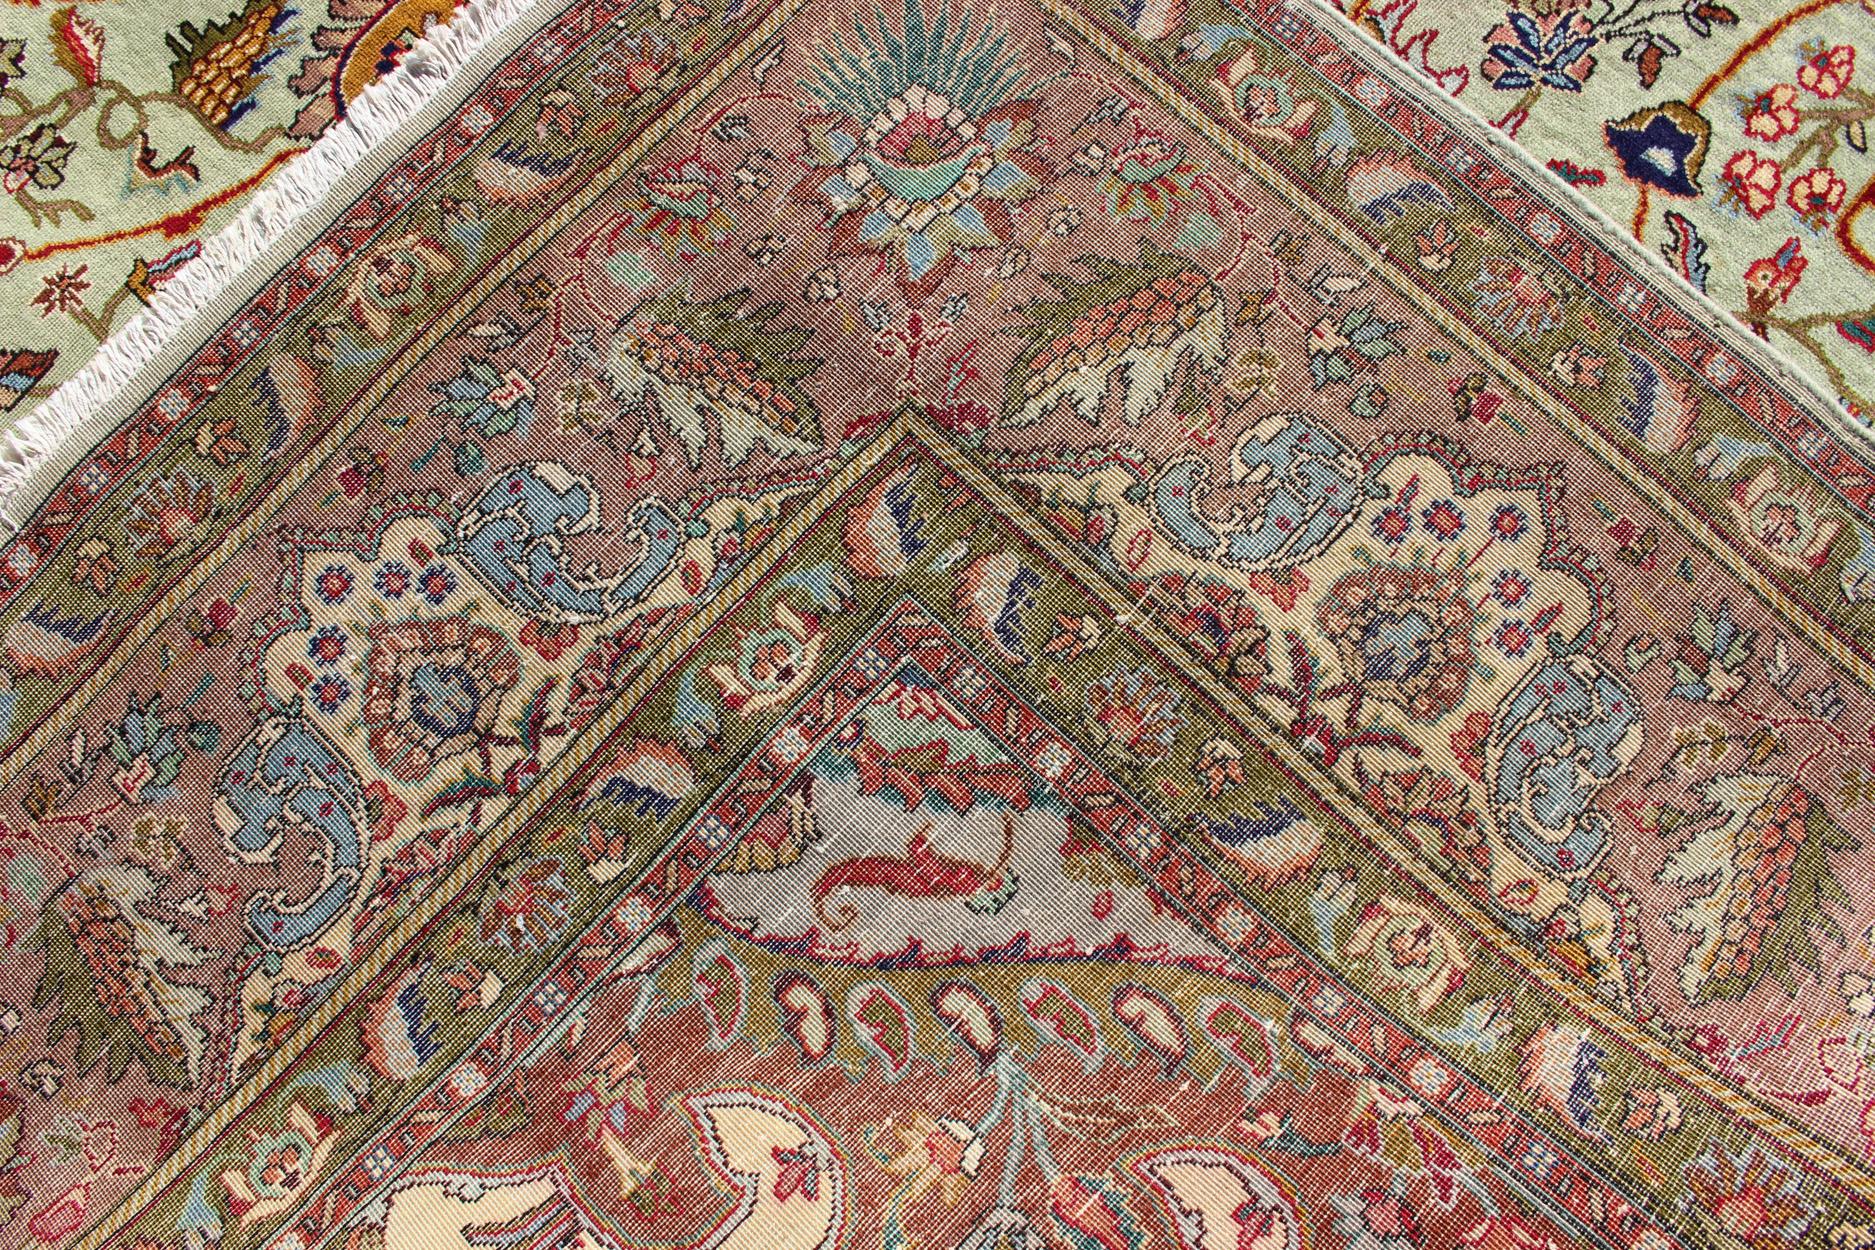 Classic Persian Tabriz Vintage Rug in Celadon Green, Salmon and Multi-Colors For Sale 7